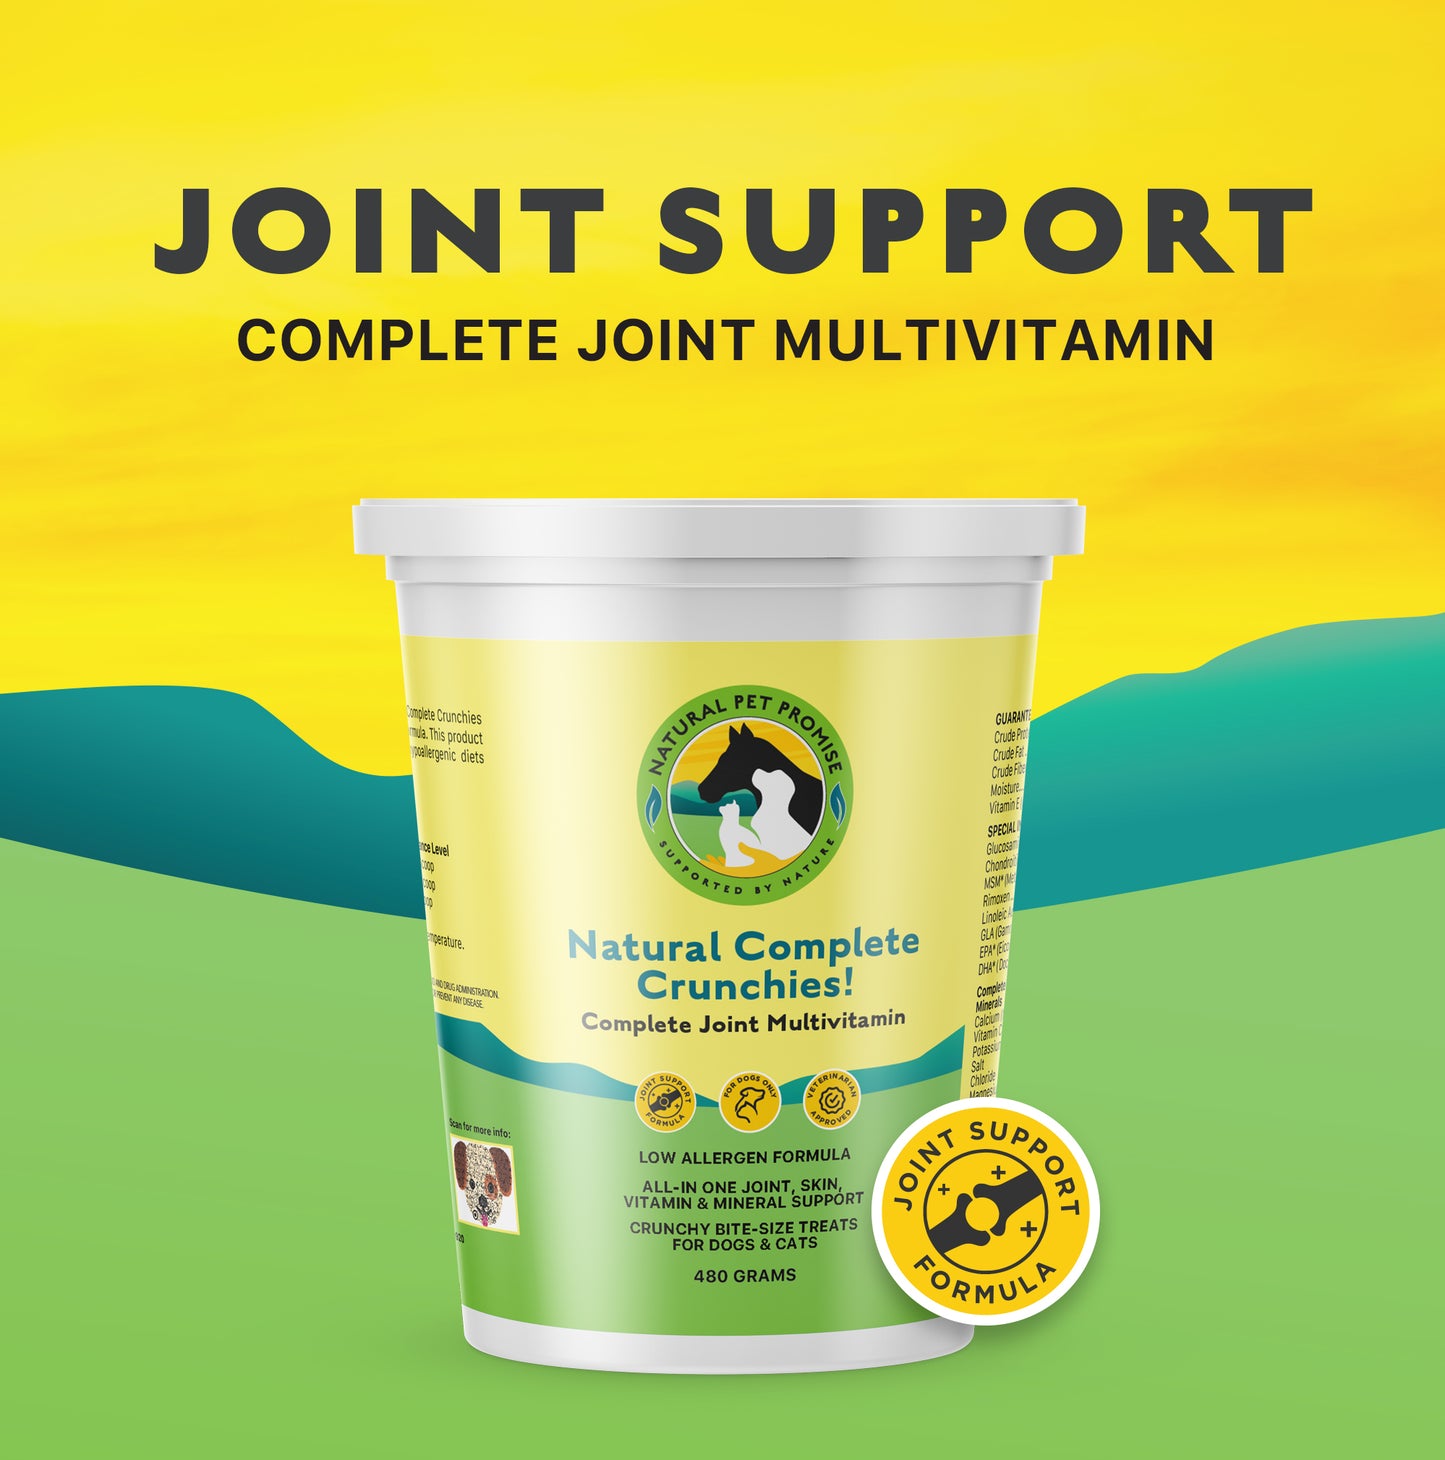 JOINT SUPPORT/VITAMIN- Natural Complete Crunchies! Complete Joint Multivitamins